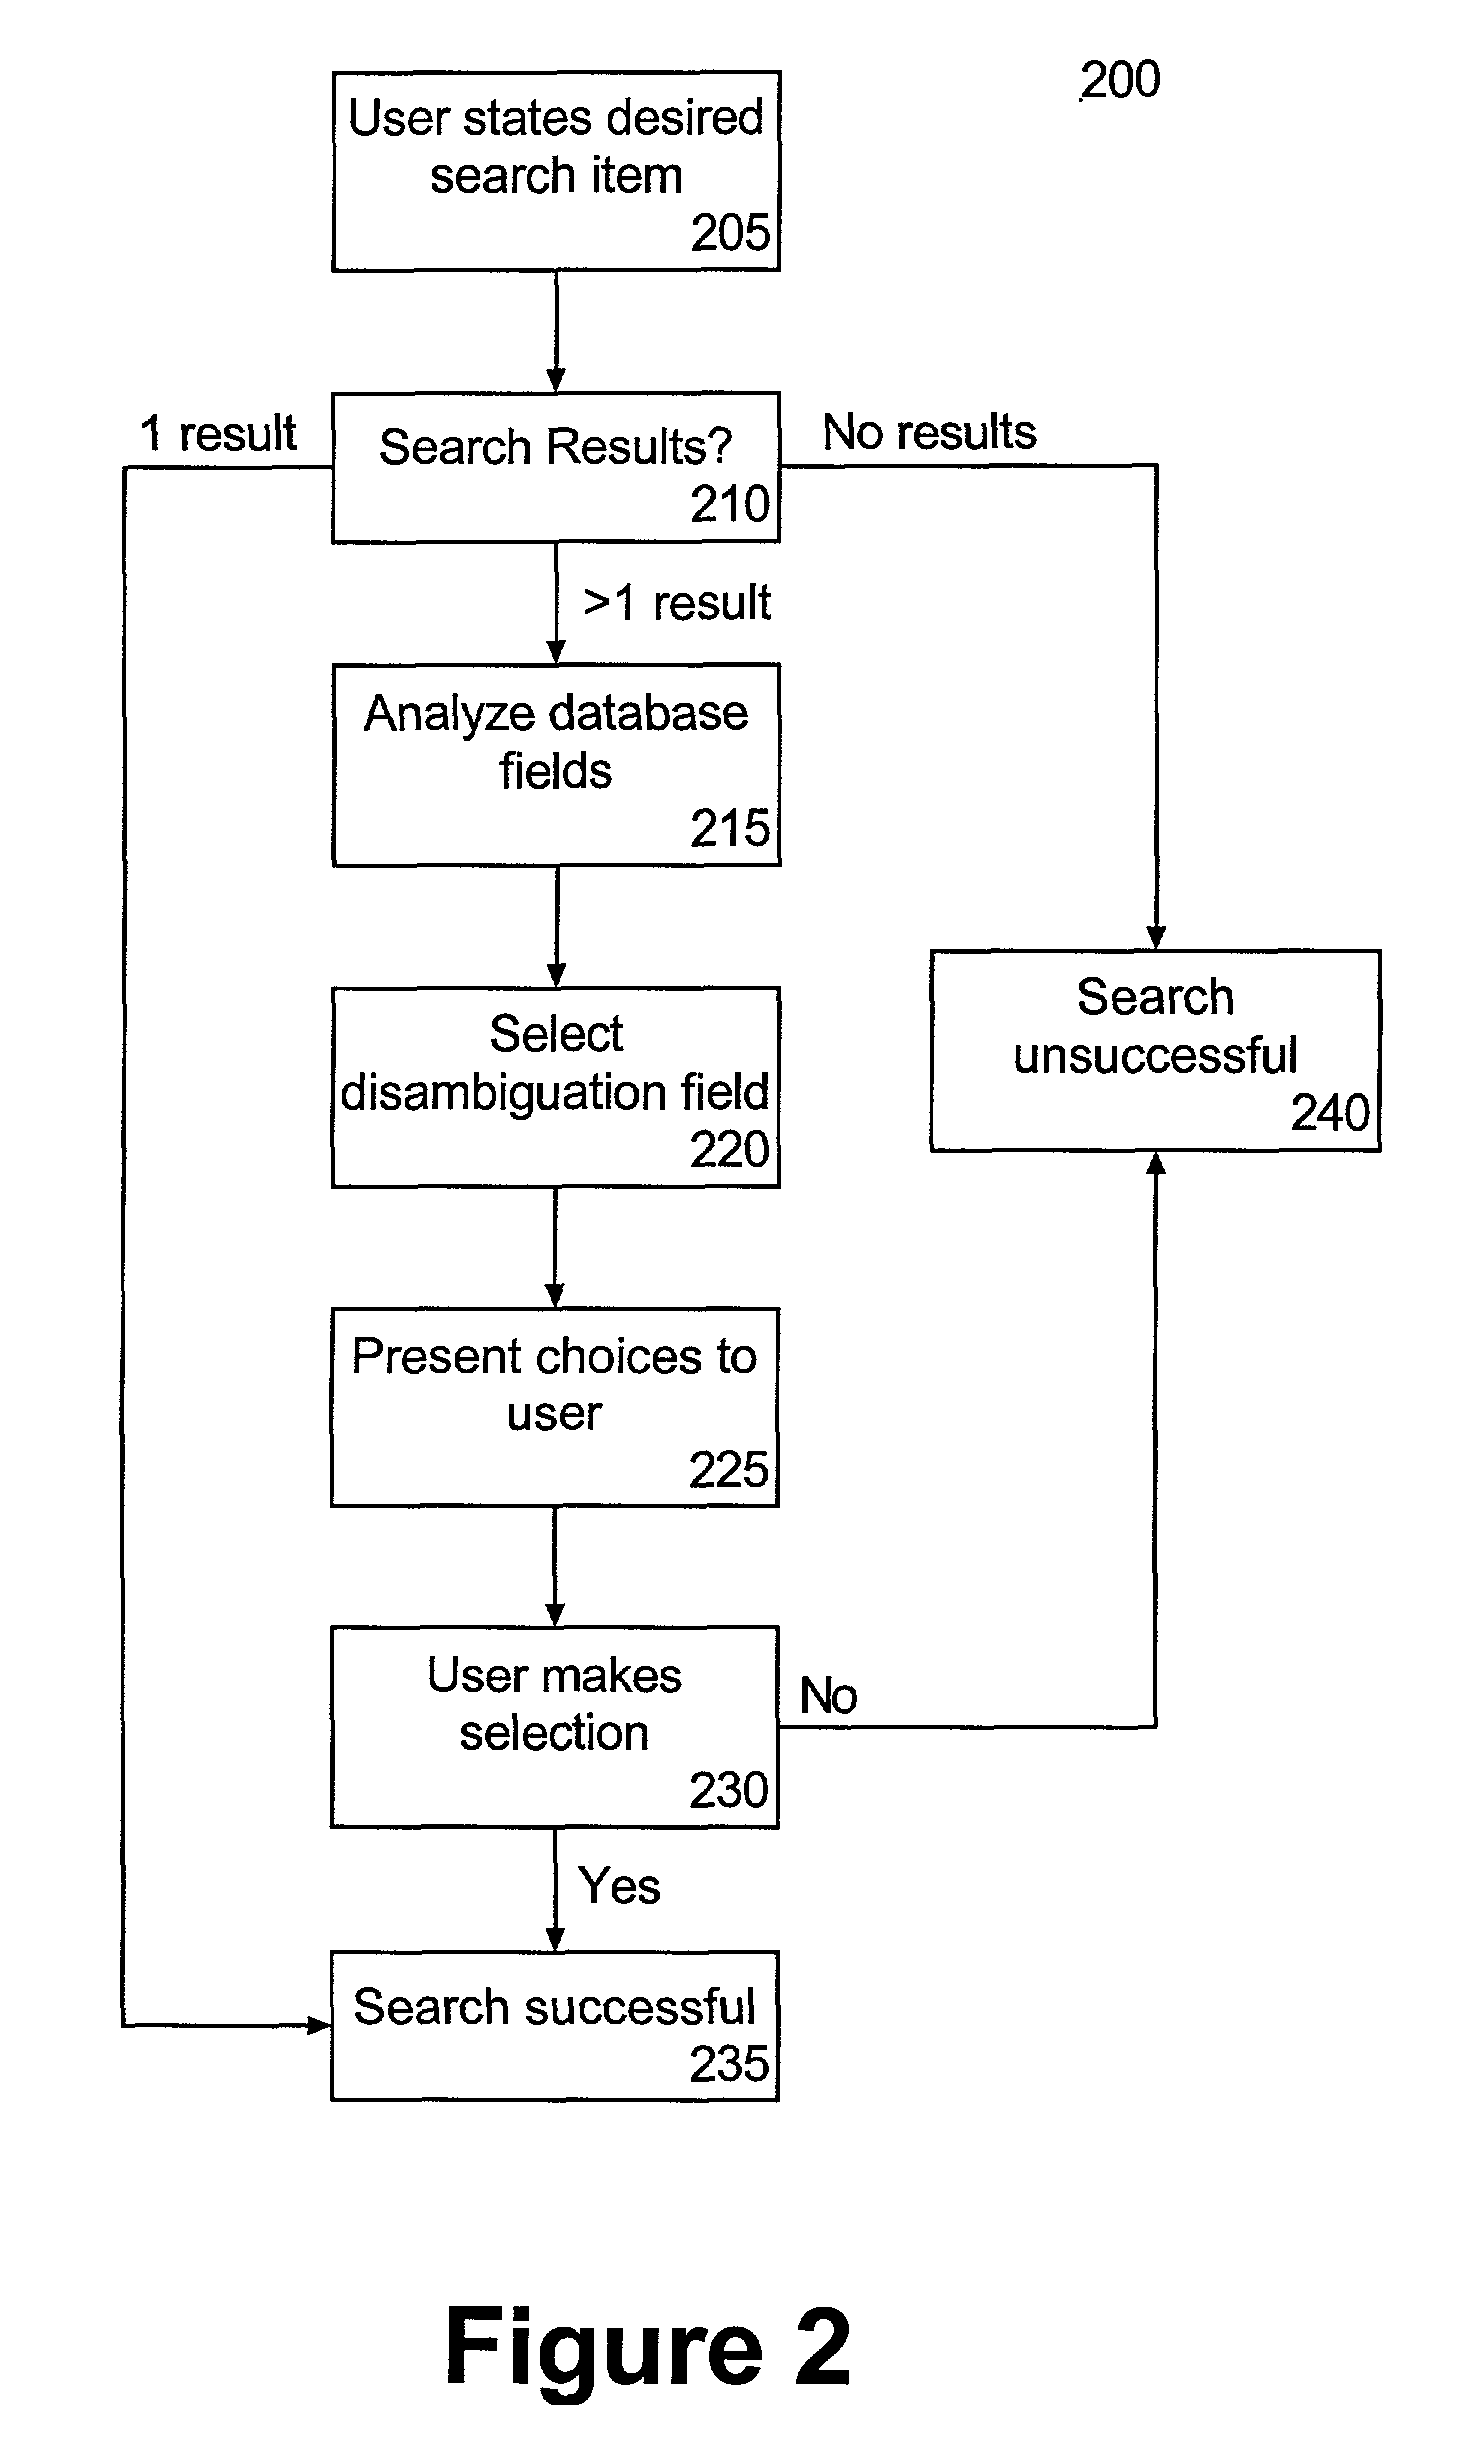 Automatic selection of a disambiguation data field for a speech interface